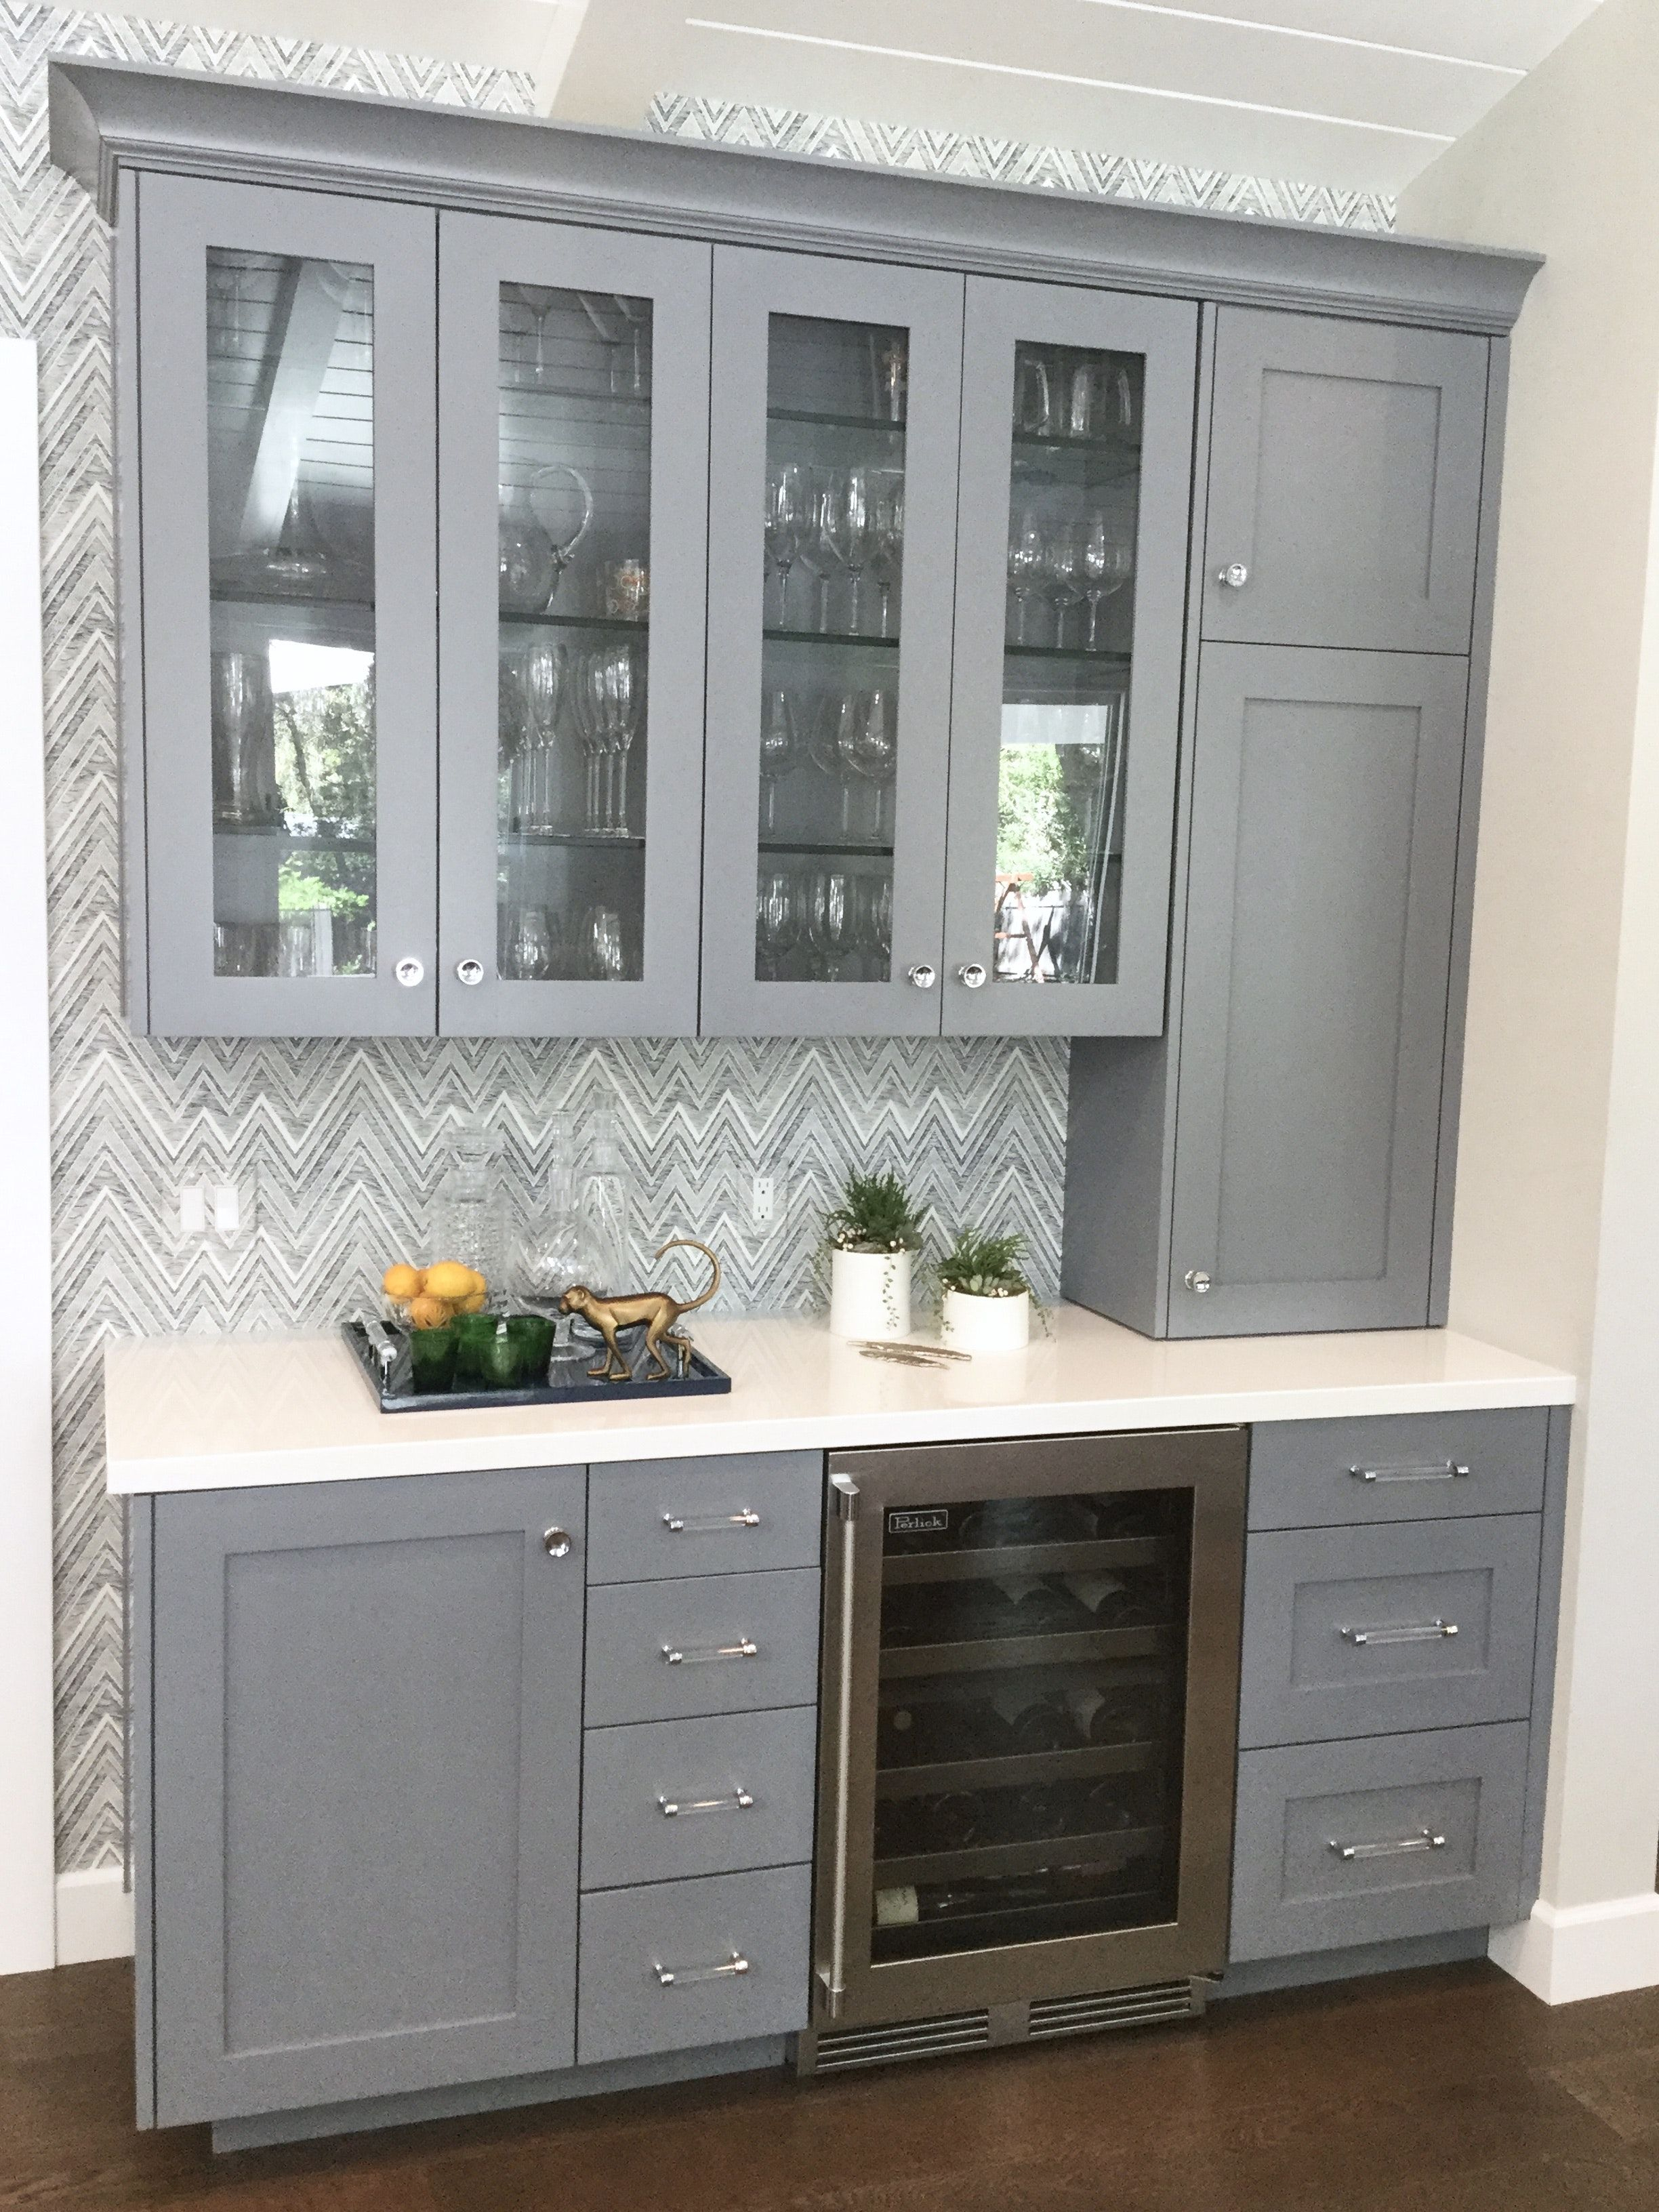 Custom Built In Bar With Grey Cabinetry And Wallpaper intended for size 2448 X 3264